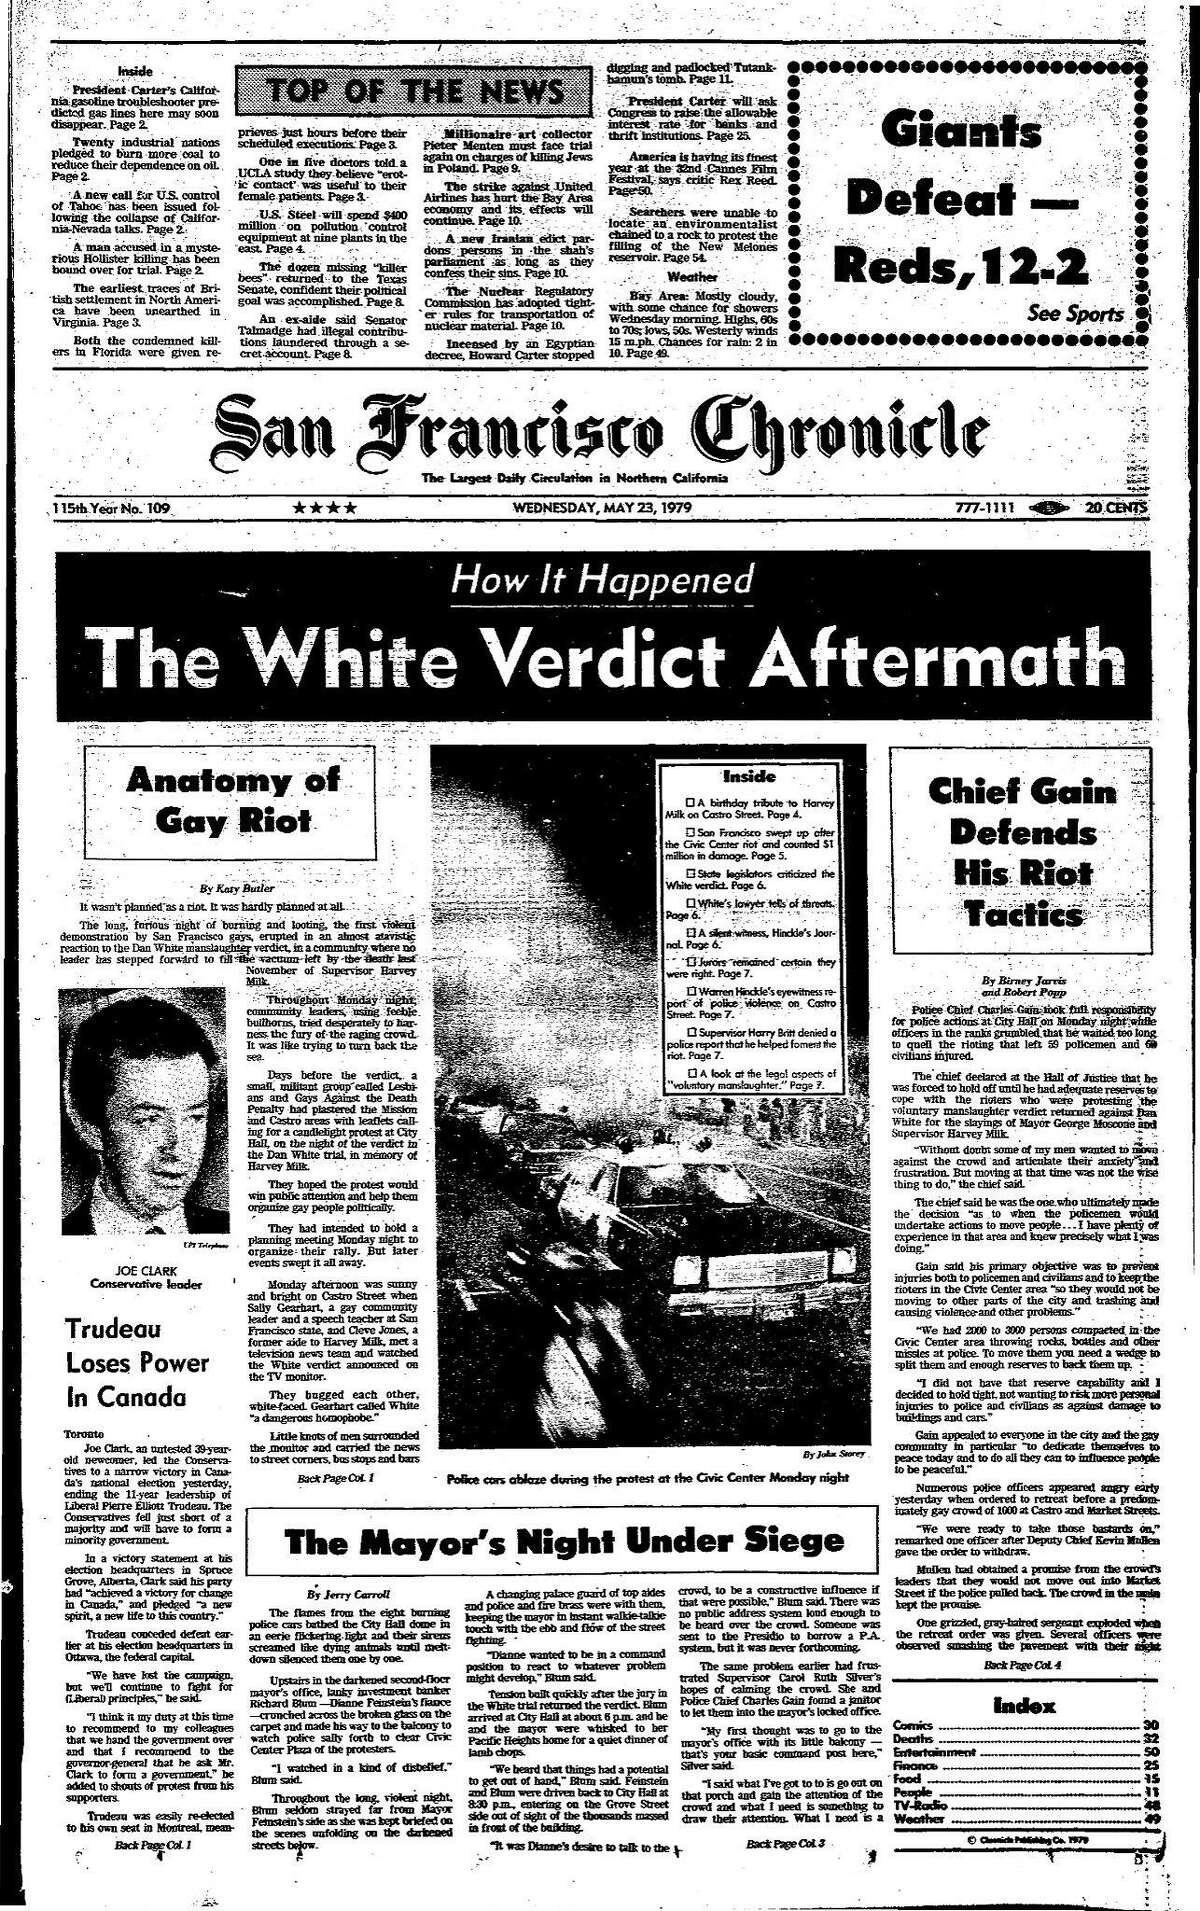 Historic Chronicle Front Page May 23, 1979 Aftermath of Dan White Verdict that set off violent protests Chron365, Chroncover